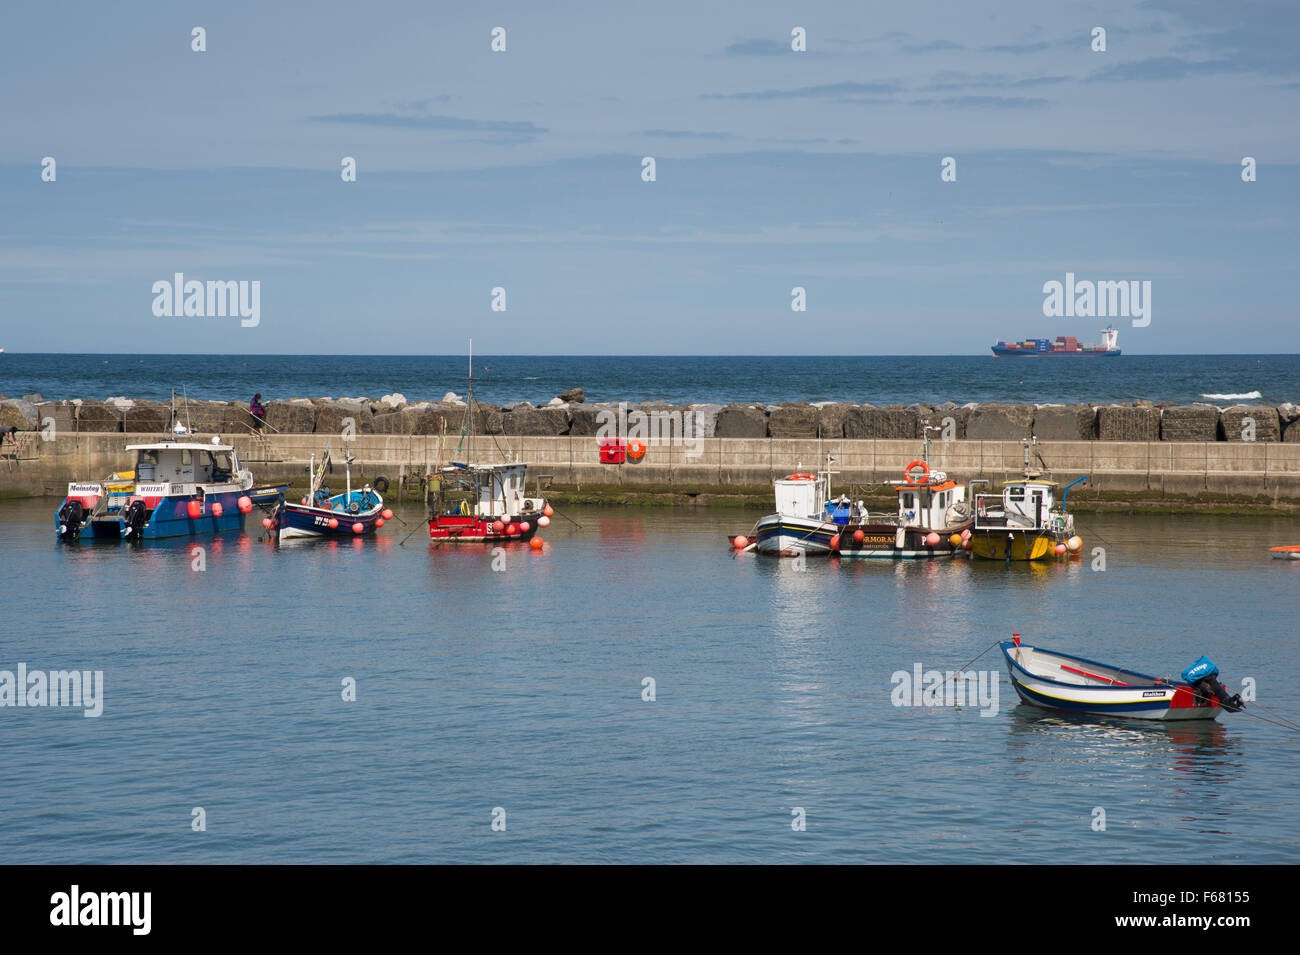 Fishing boats and cobles moored in the shelter of the scenic harbour, Staithes, North Yorkshire, UK on a calm, sunny summer day with blue sky & sea. Stock Photo